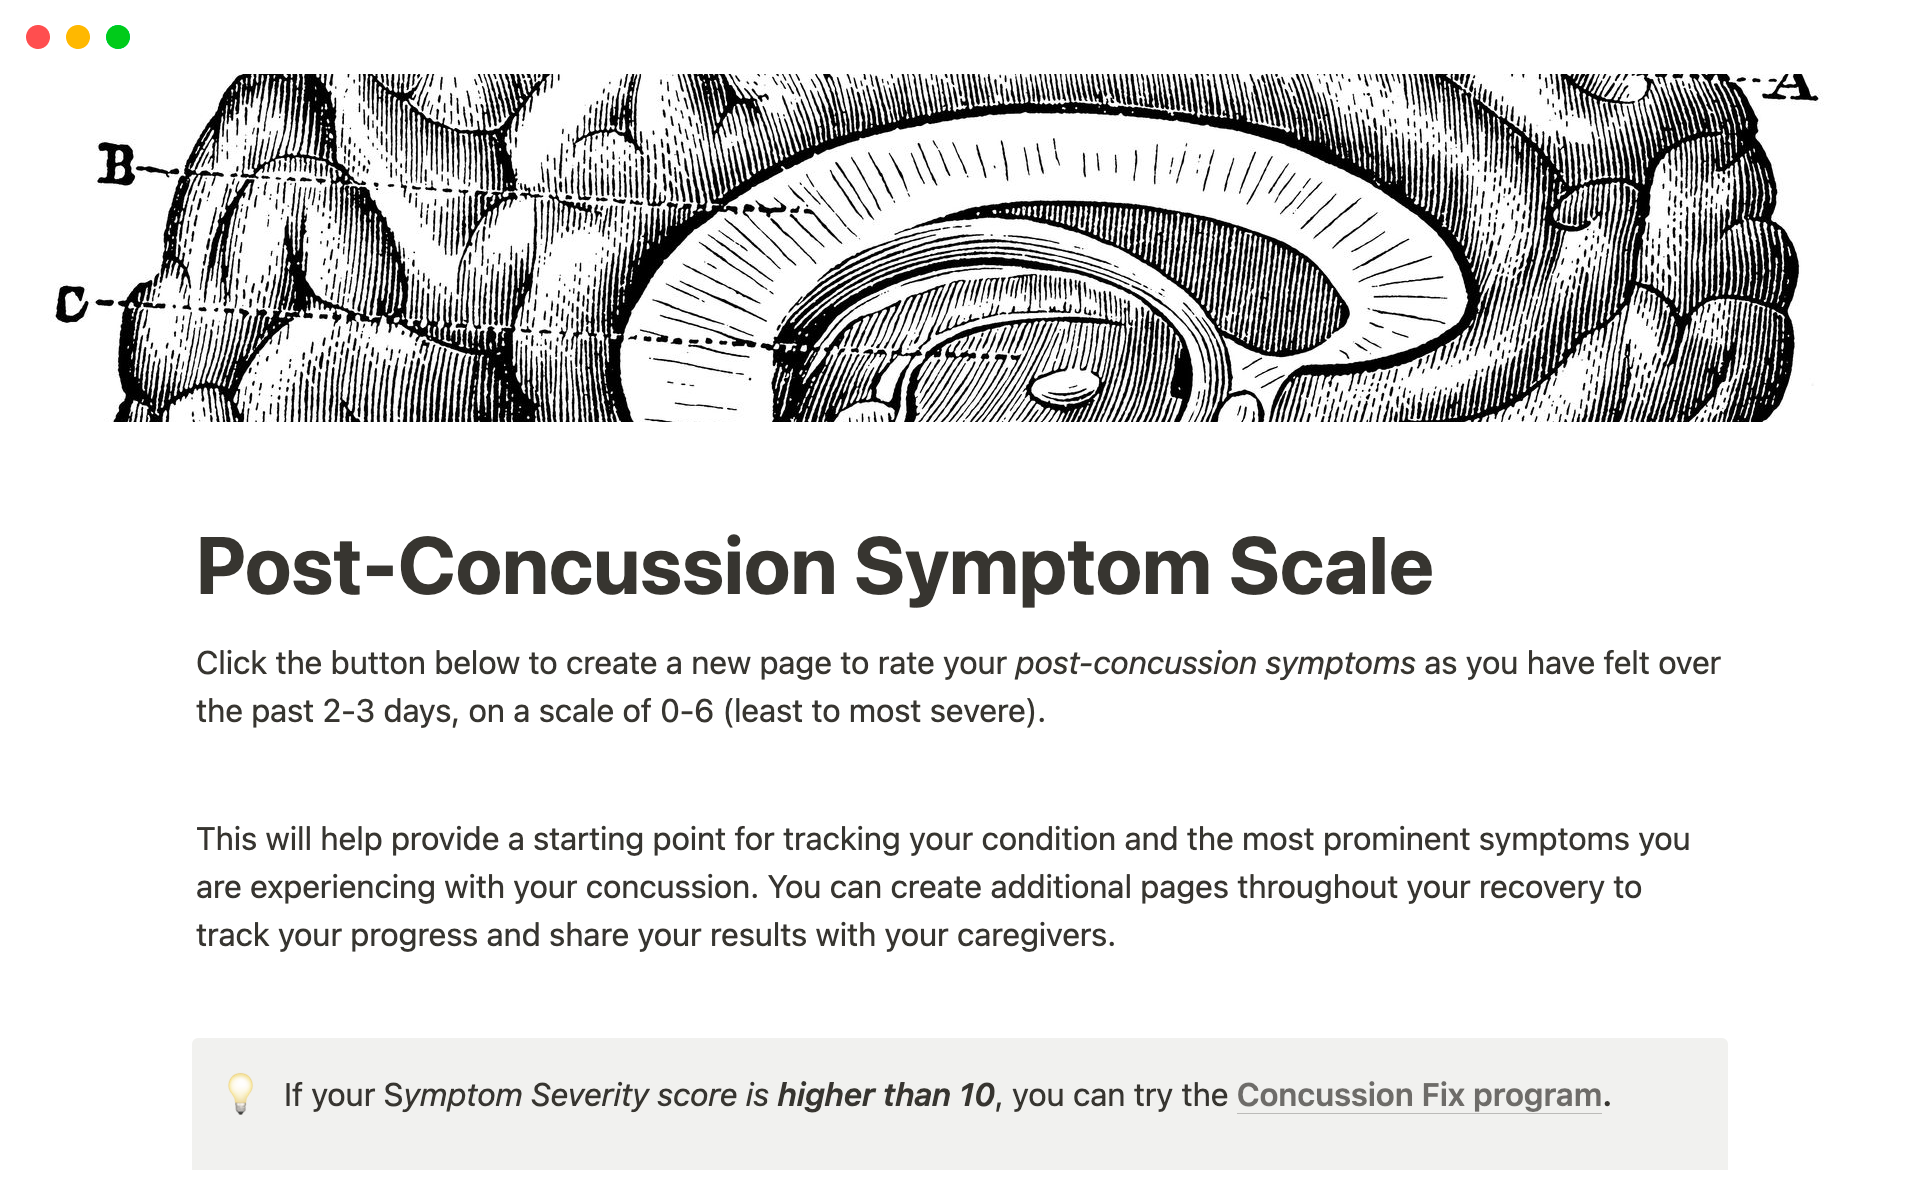 The Post-Concussion Symptom Scale is a tool used to measure and track symptoms associated with post-concussion syndrome.